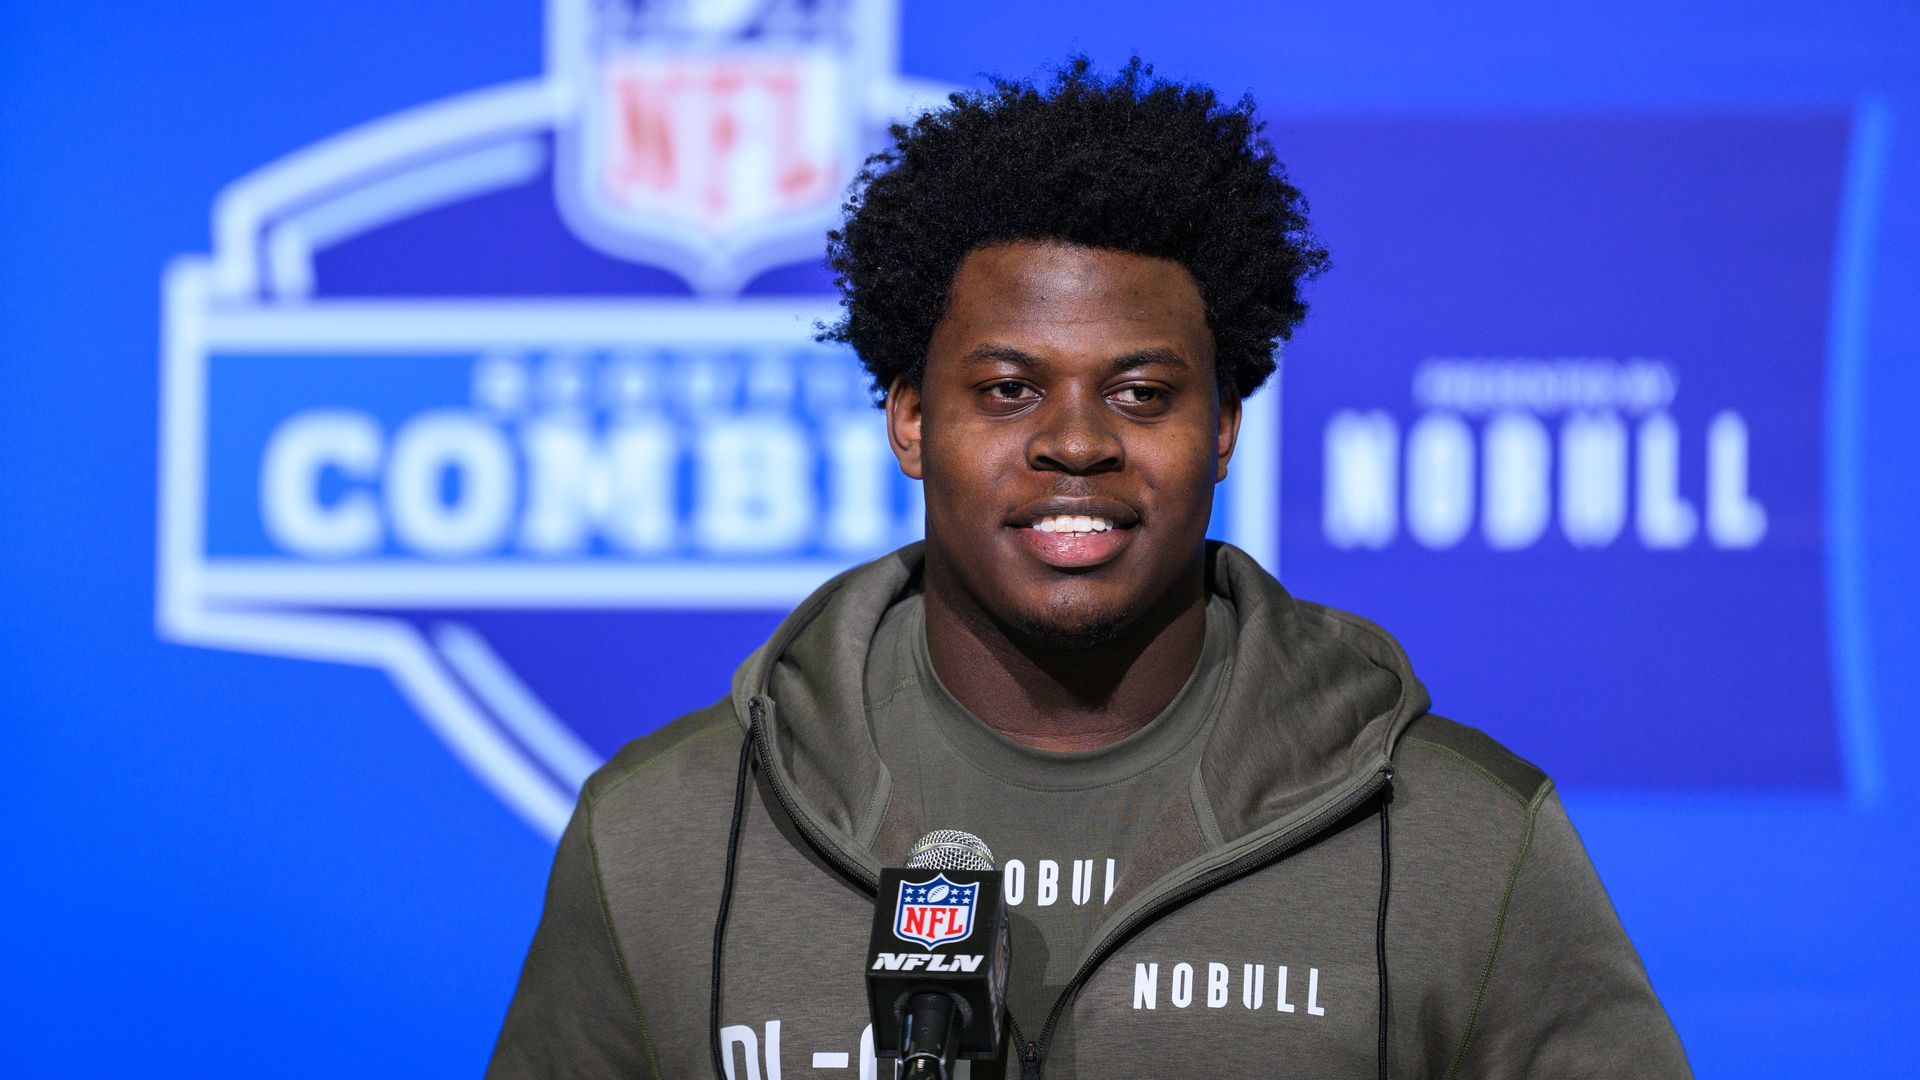 INDIANAPOLIS, IN - MARCH 01: Pittsburgh defensive lineman Calijah Kancey answers questions from the media during the NFL Scouting Combine on March 1, 2023, at the Indiana Convention Center in Indianapolis, IN. (Photo by Zach Bolinger/Icon Sportswire via Getty Images)